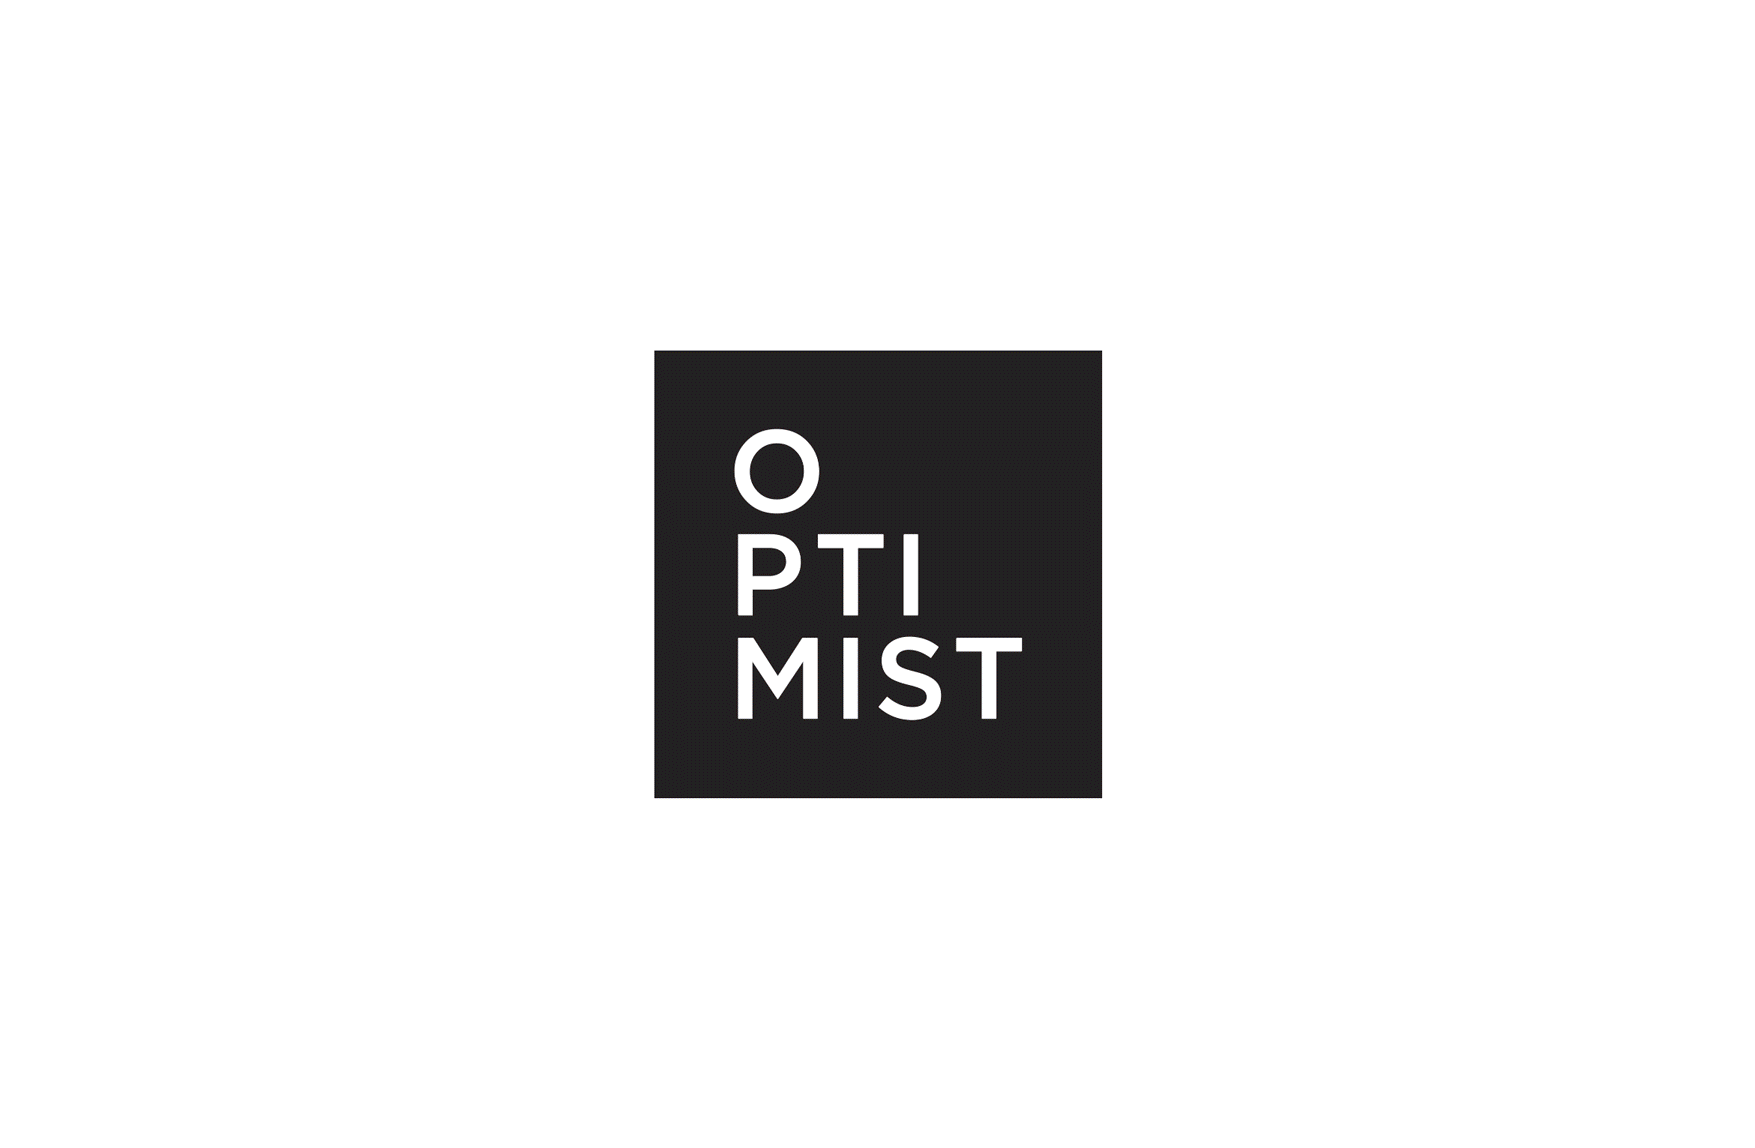 animation of optimist logo as vessel for various imagery from their films